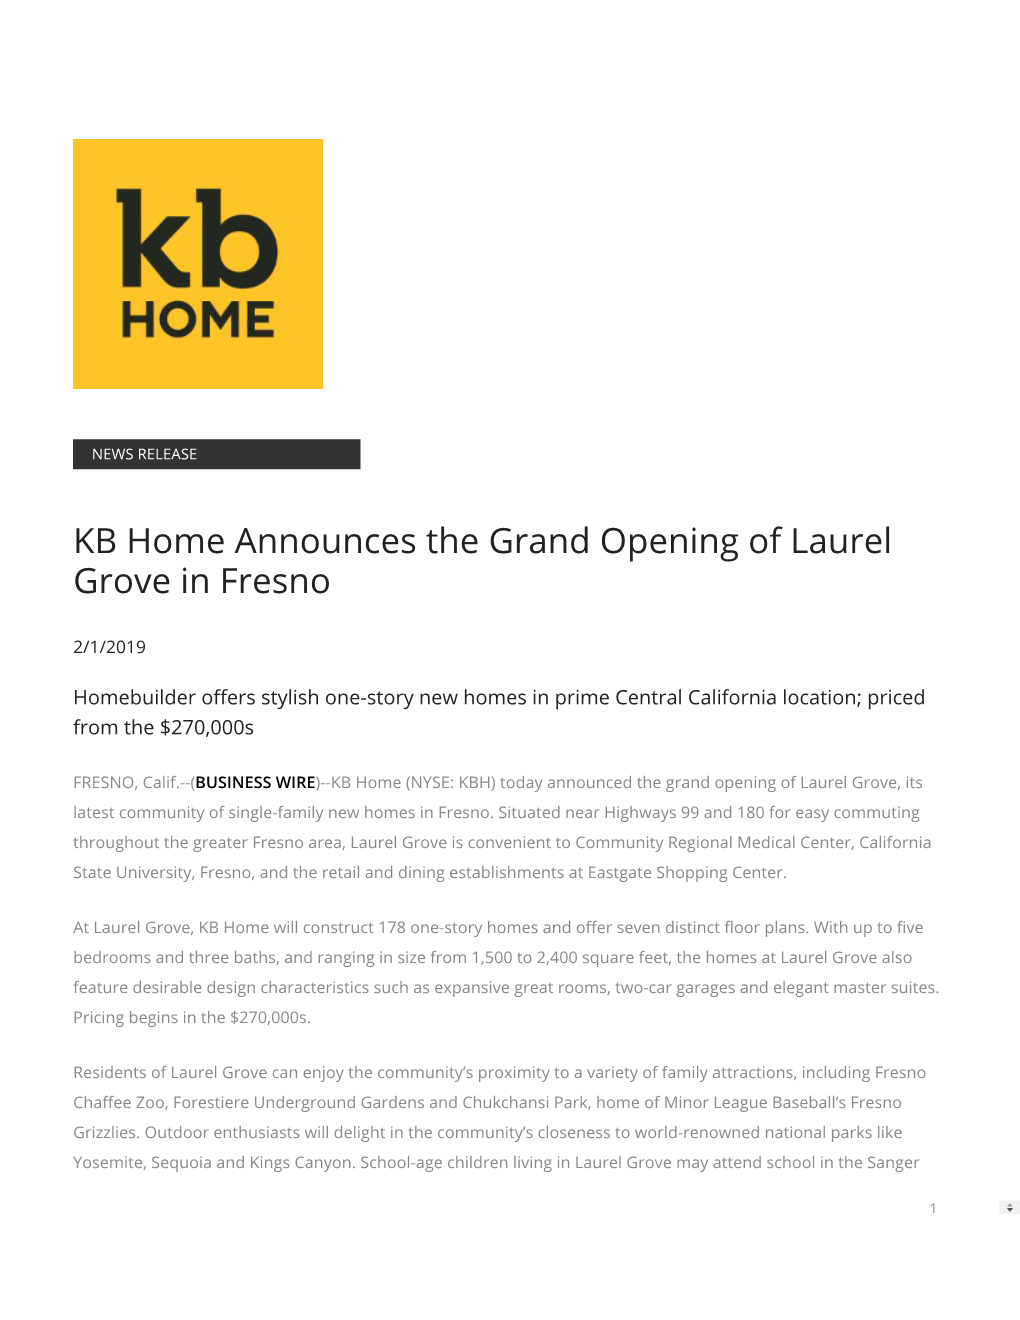 KB Home Announces the Grand Opening of Laurel Grove in Fresno